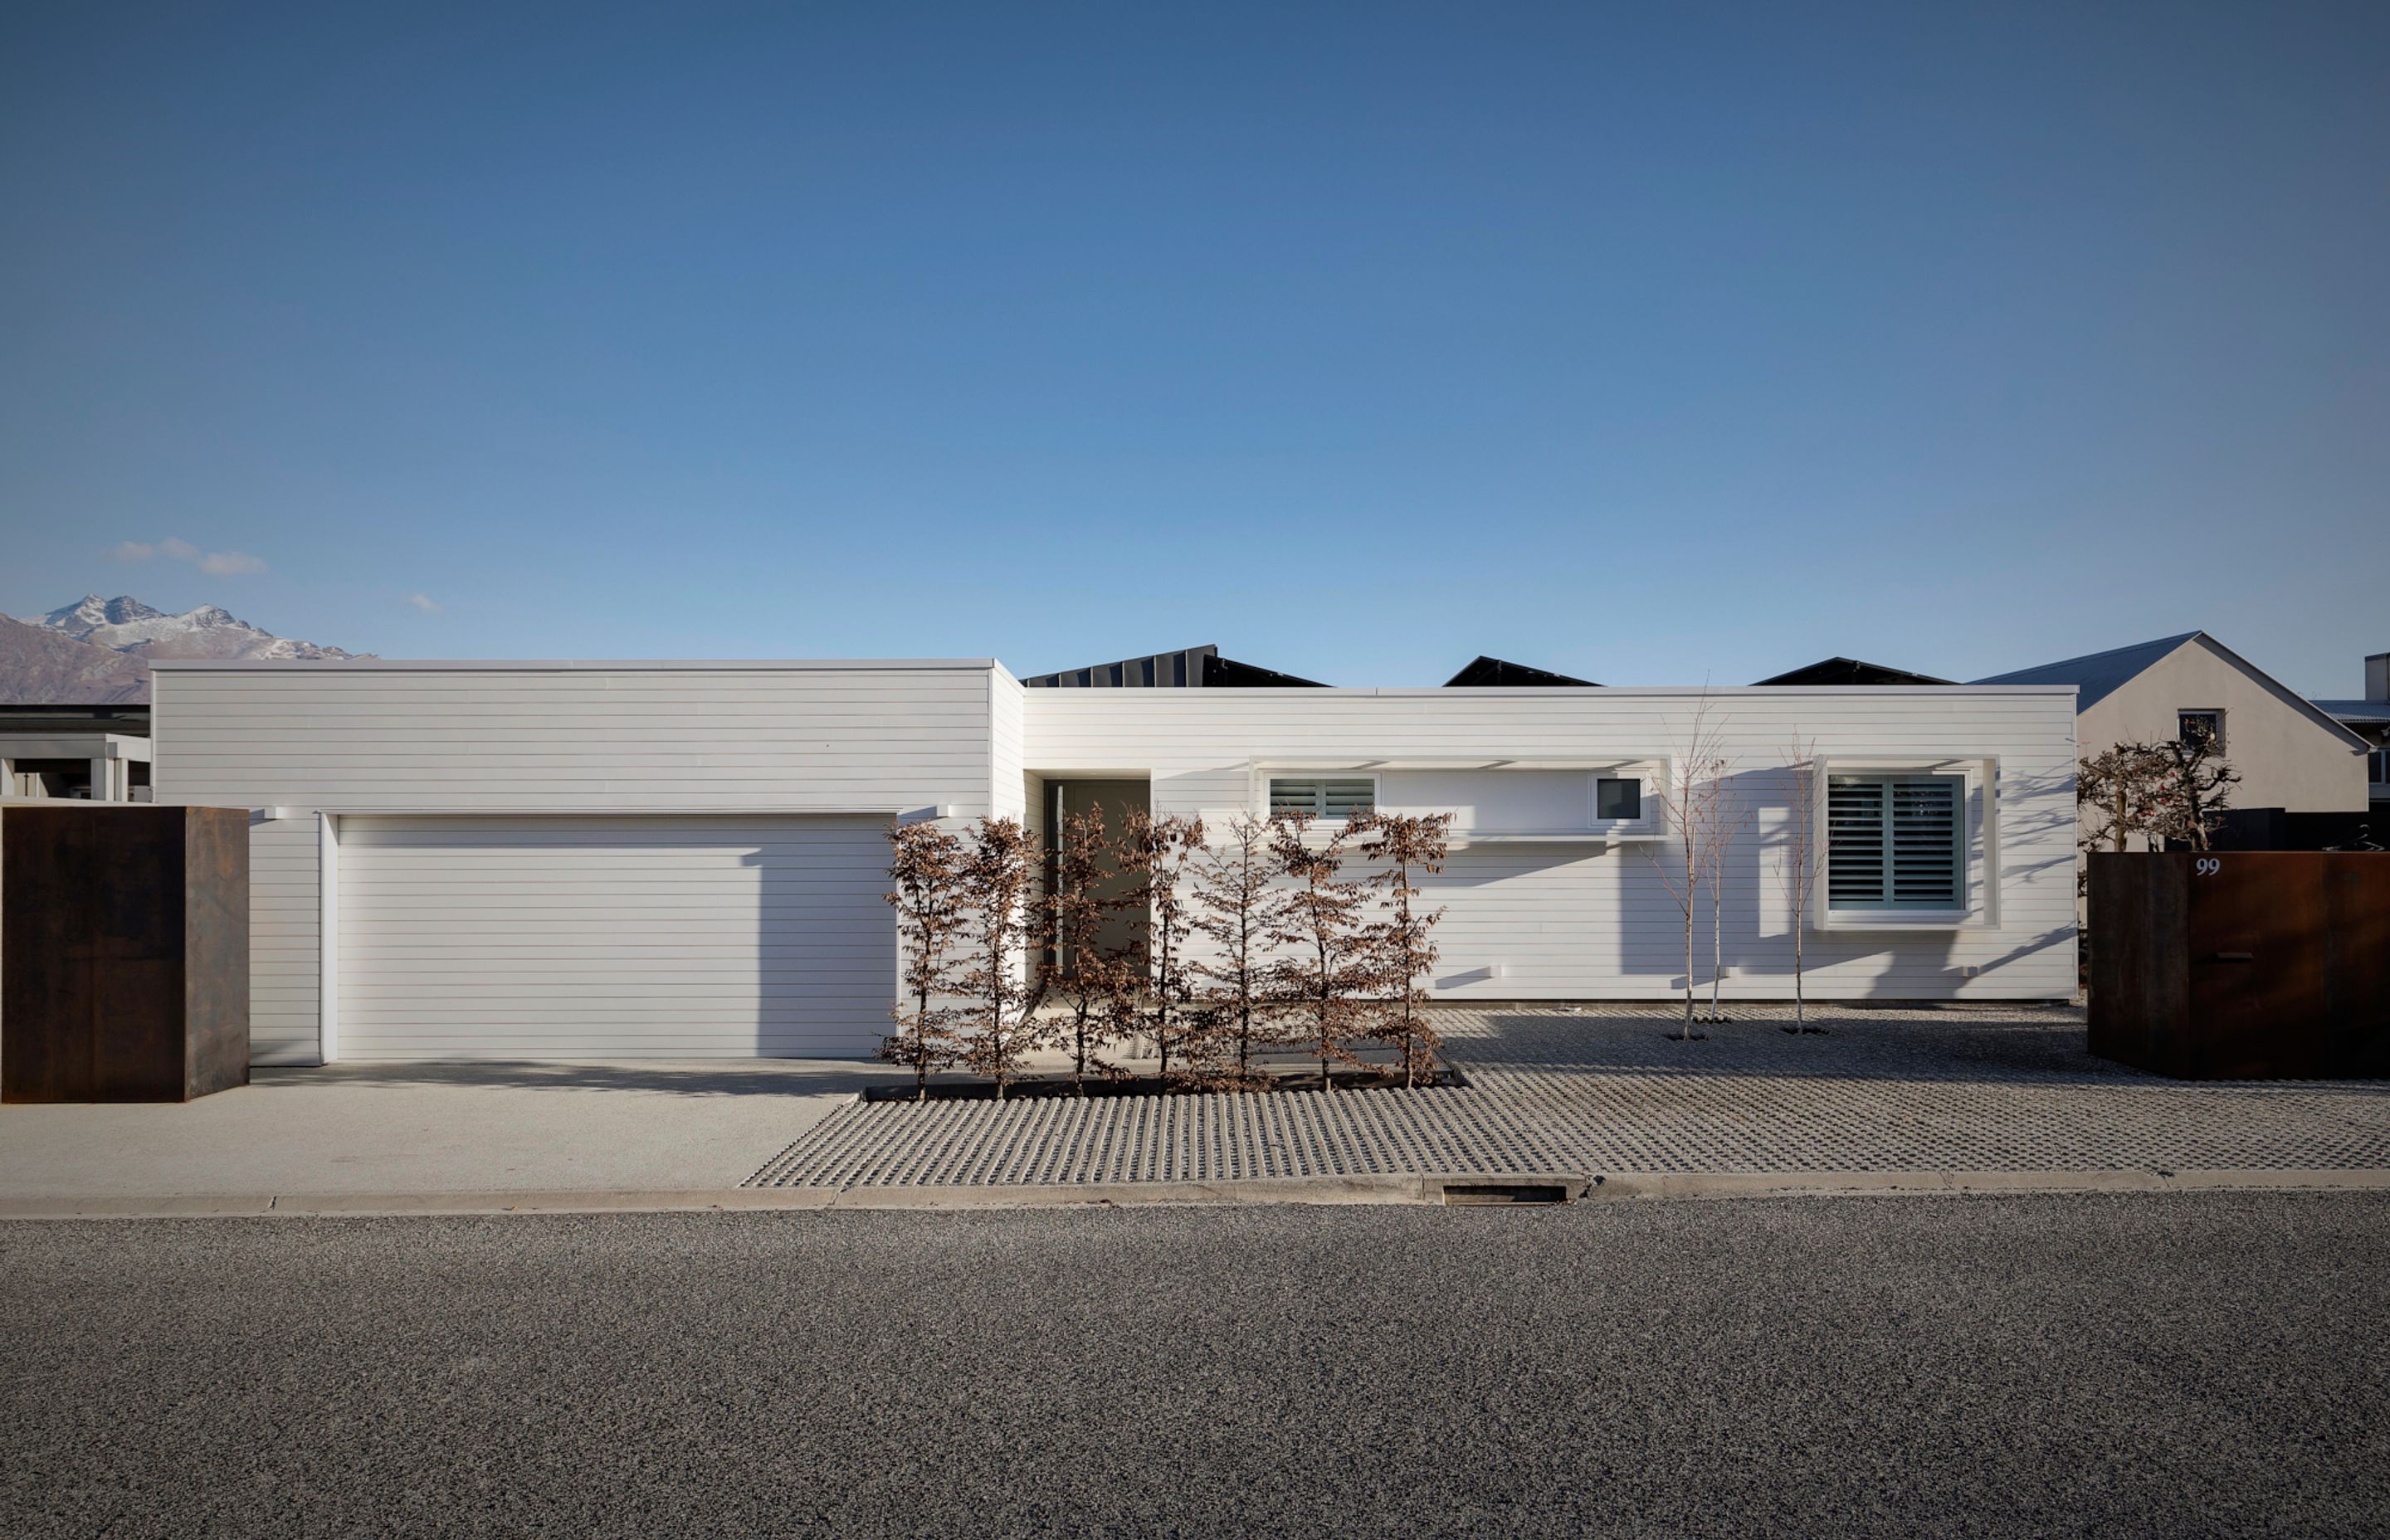 The street frontage blends into the natural environment and references the snowy peaks of the nearby Remarkables mountain range.